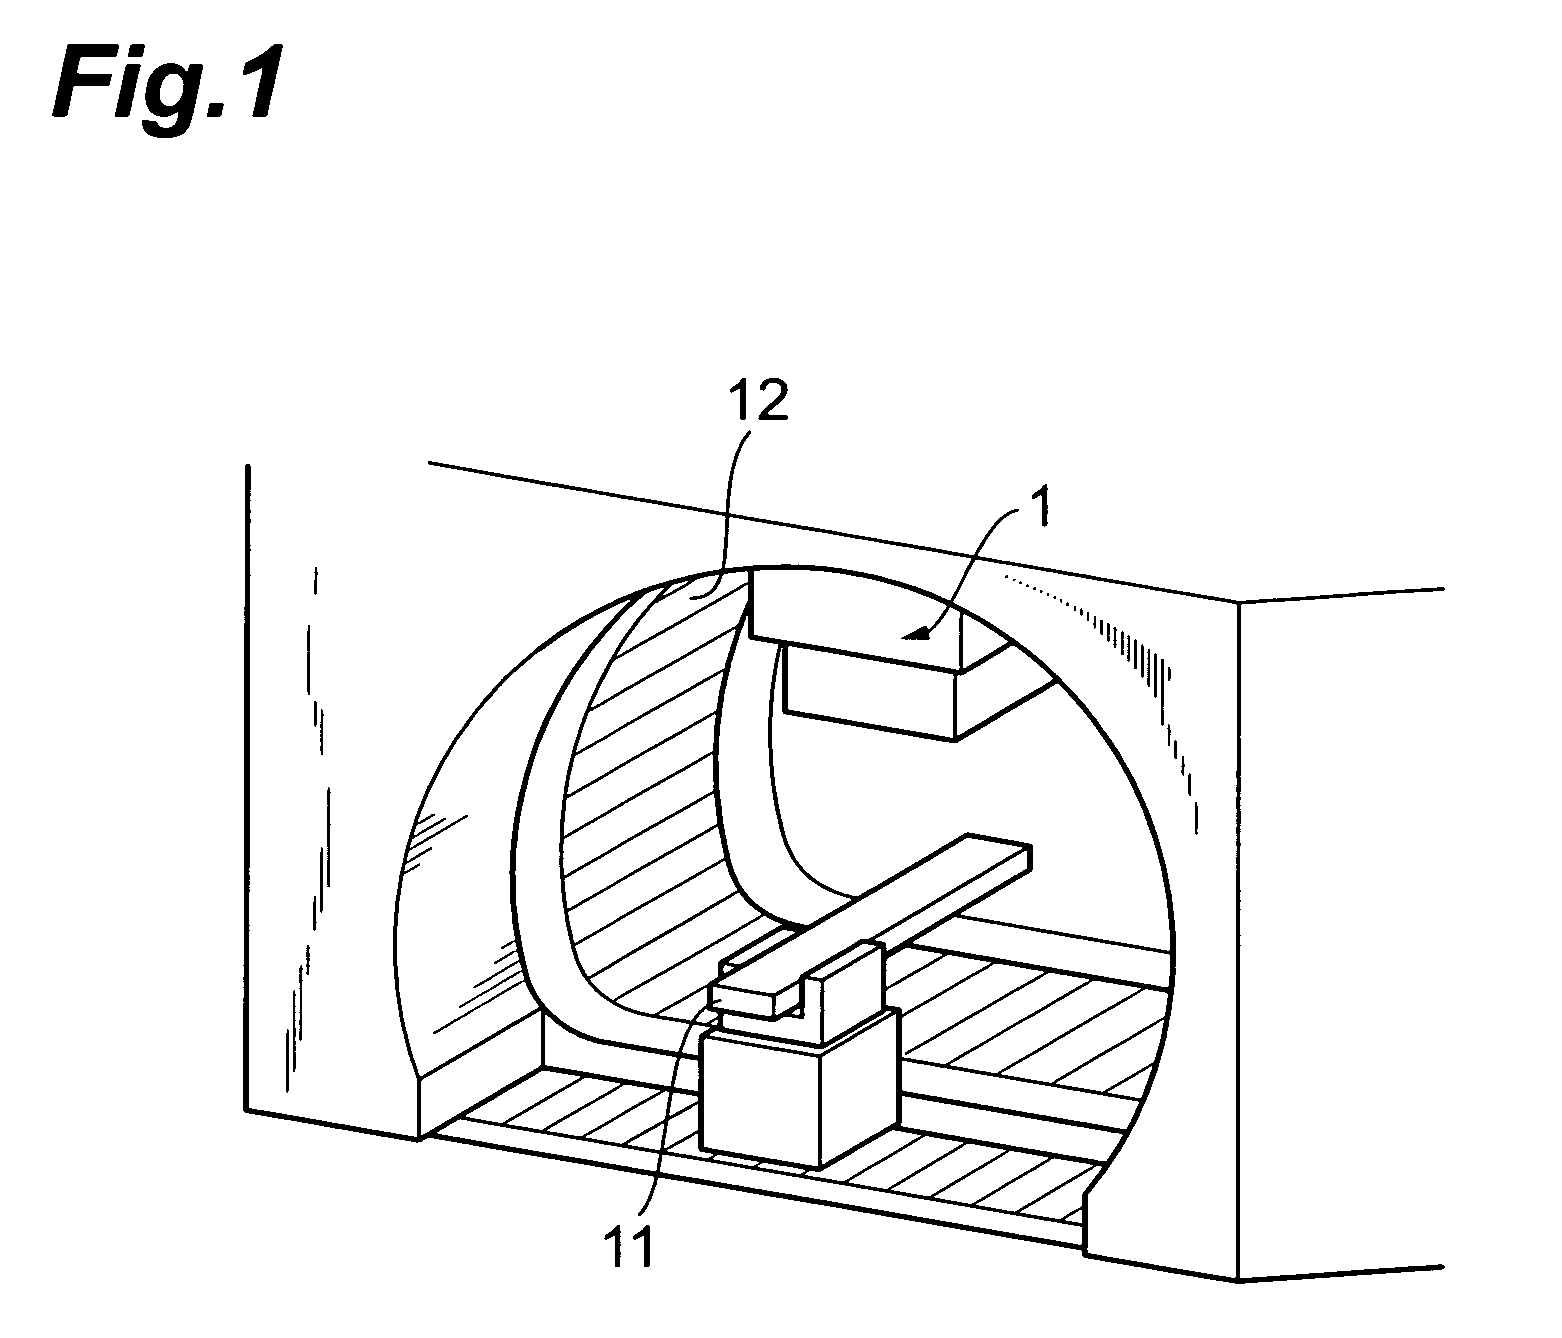 Charged particle beam irradiating apparatus